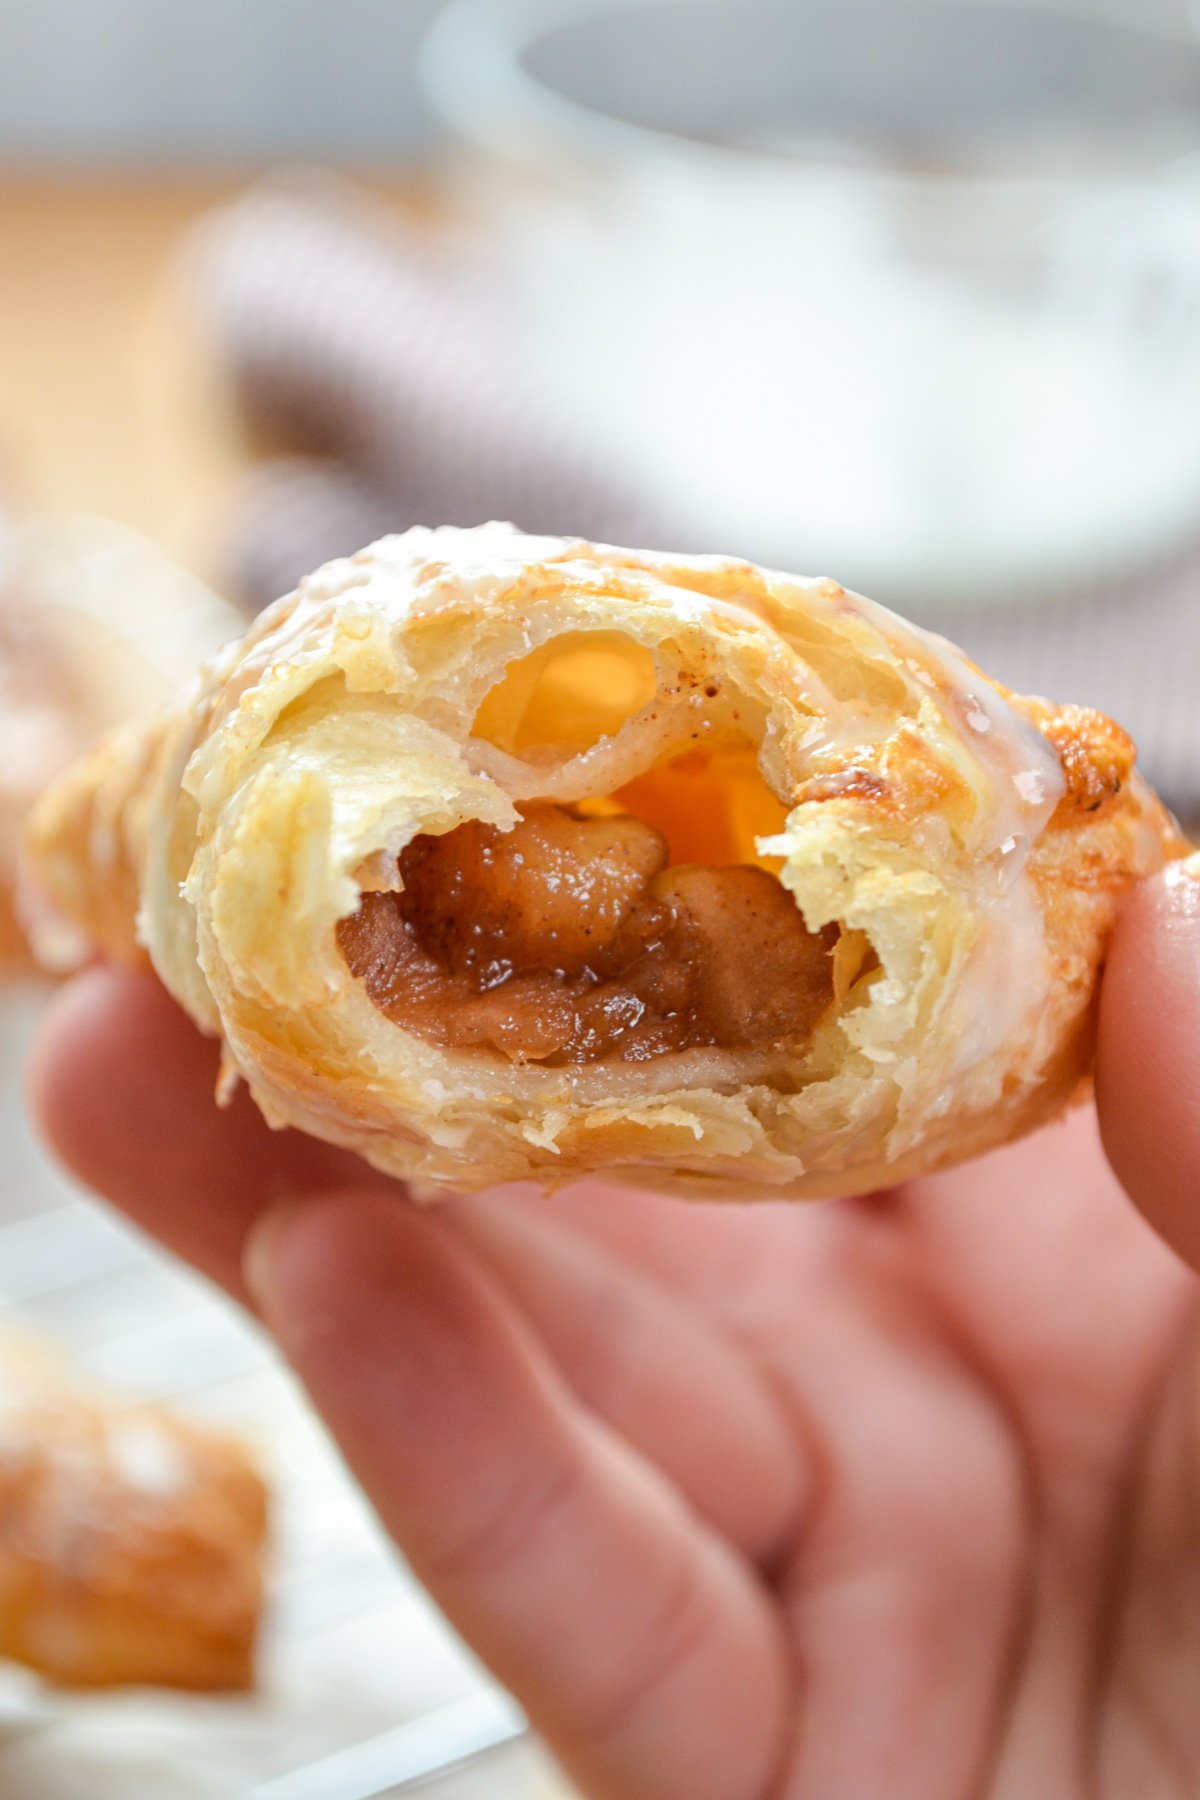 An apple turnover, with a bite taken out of it, exposing the apple filling.